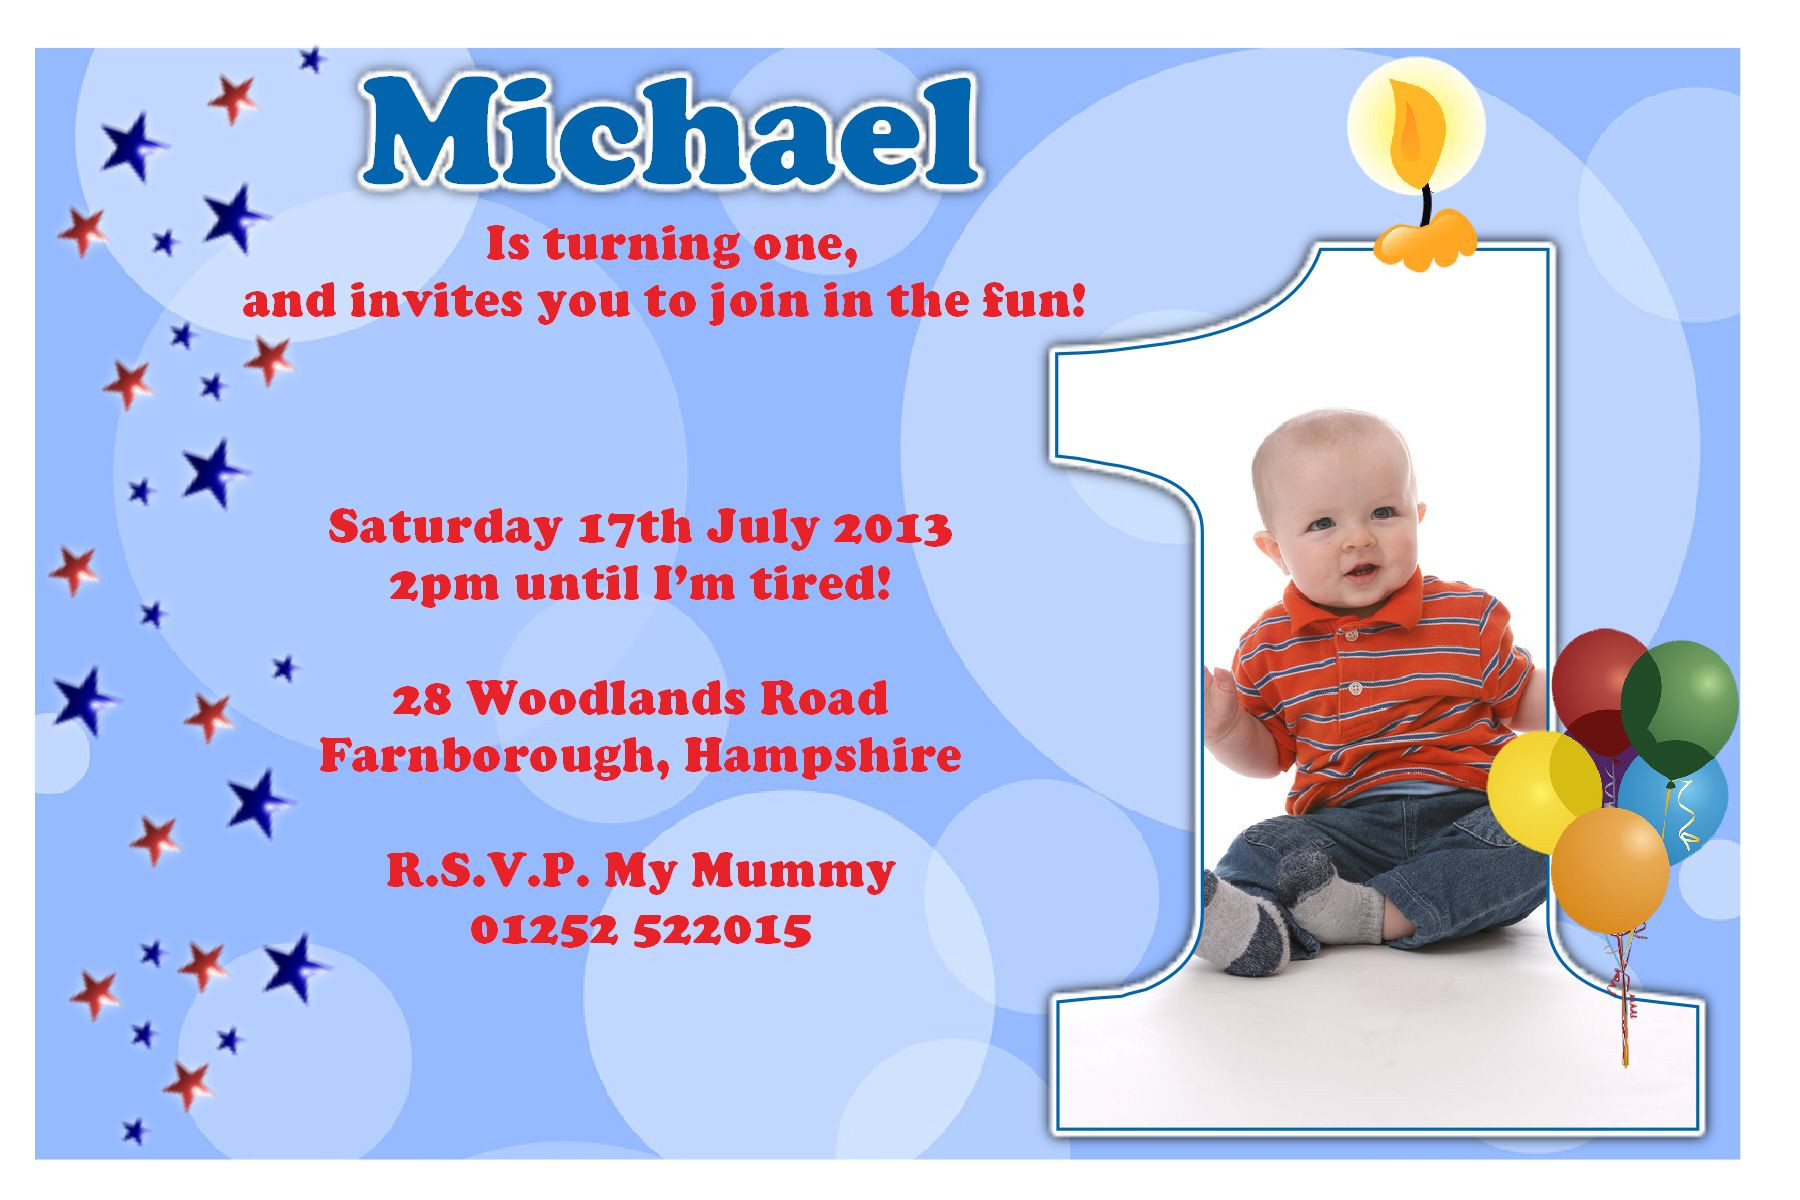 The Best Birthday Invitation Wording Samples - Home, Family, Style and